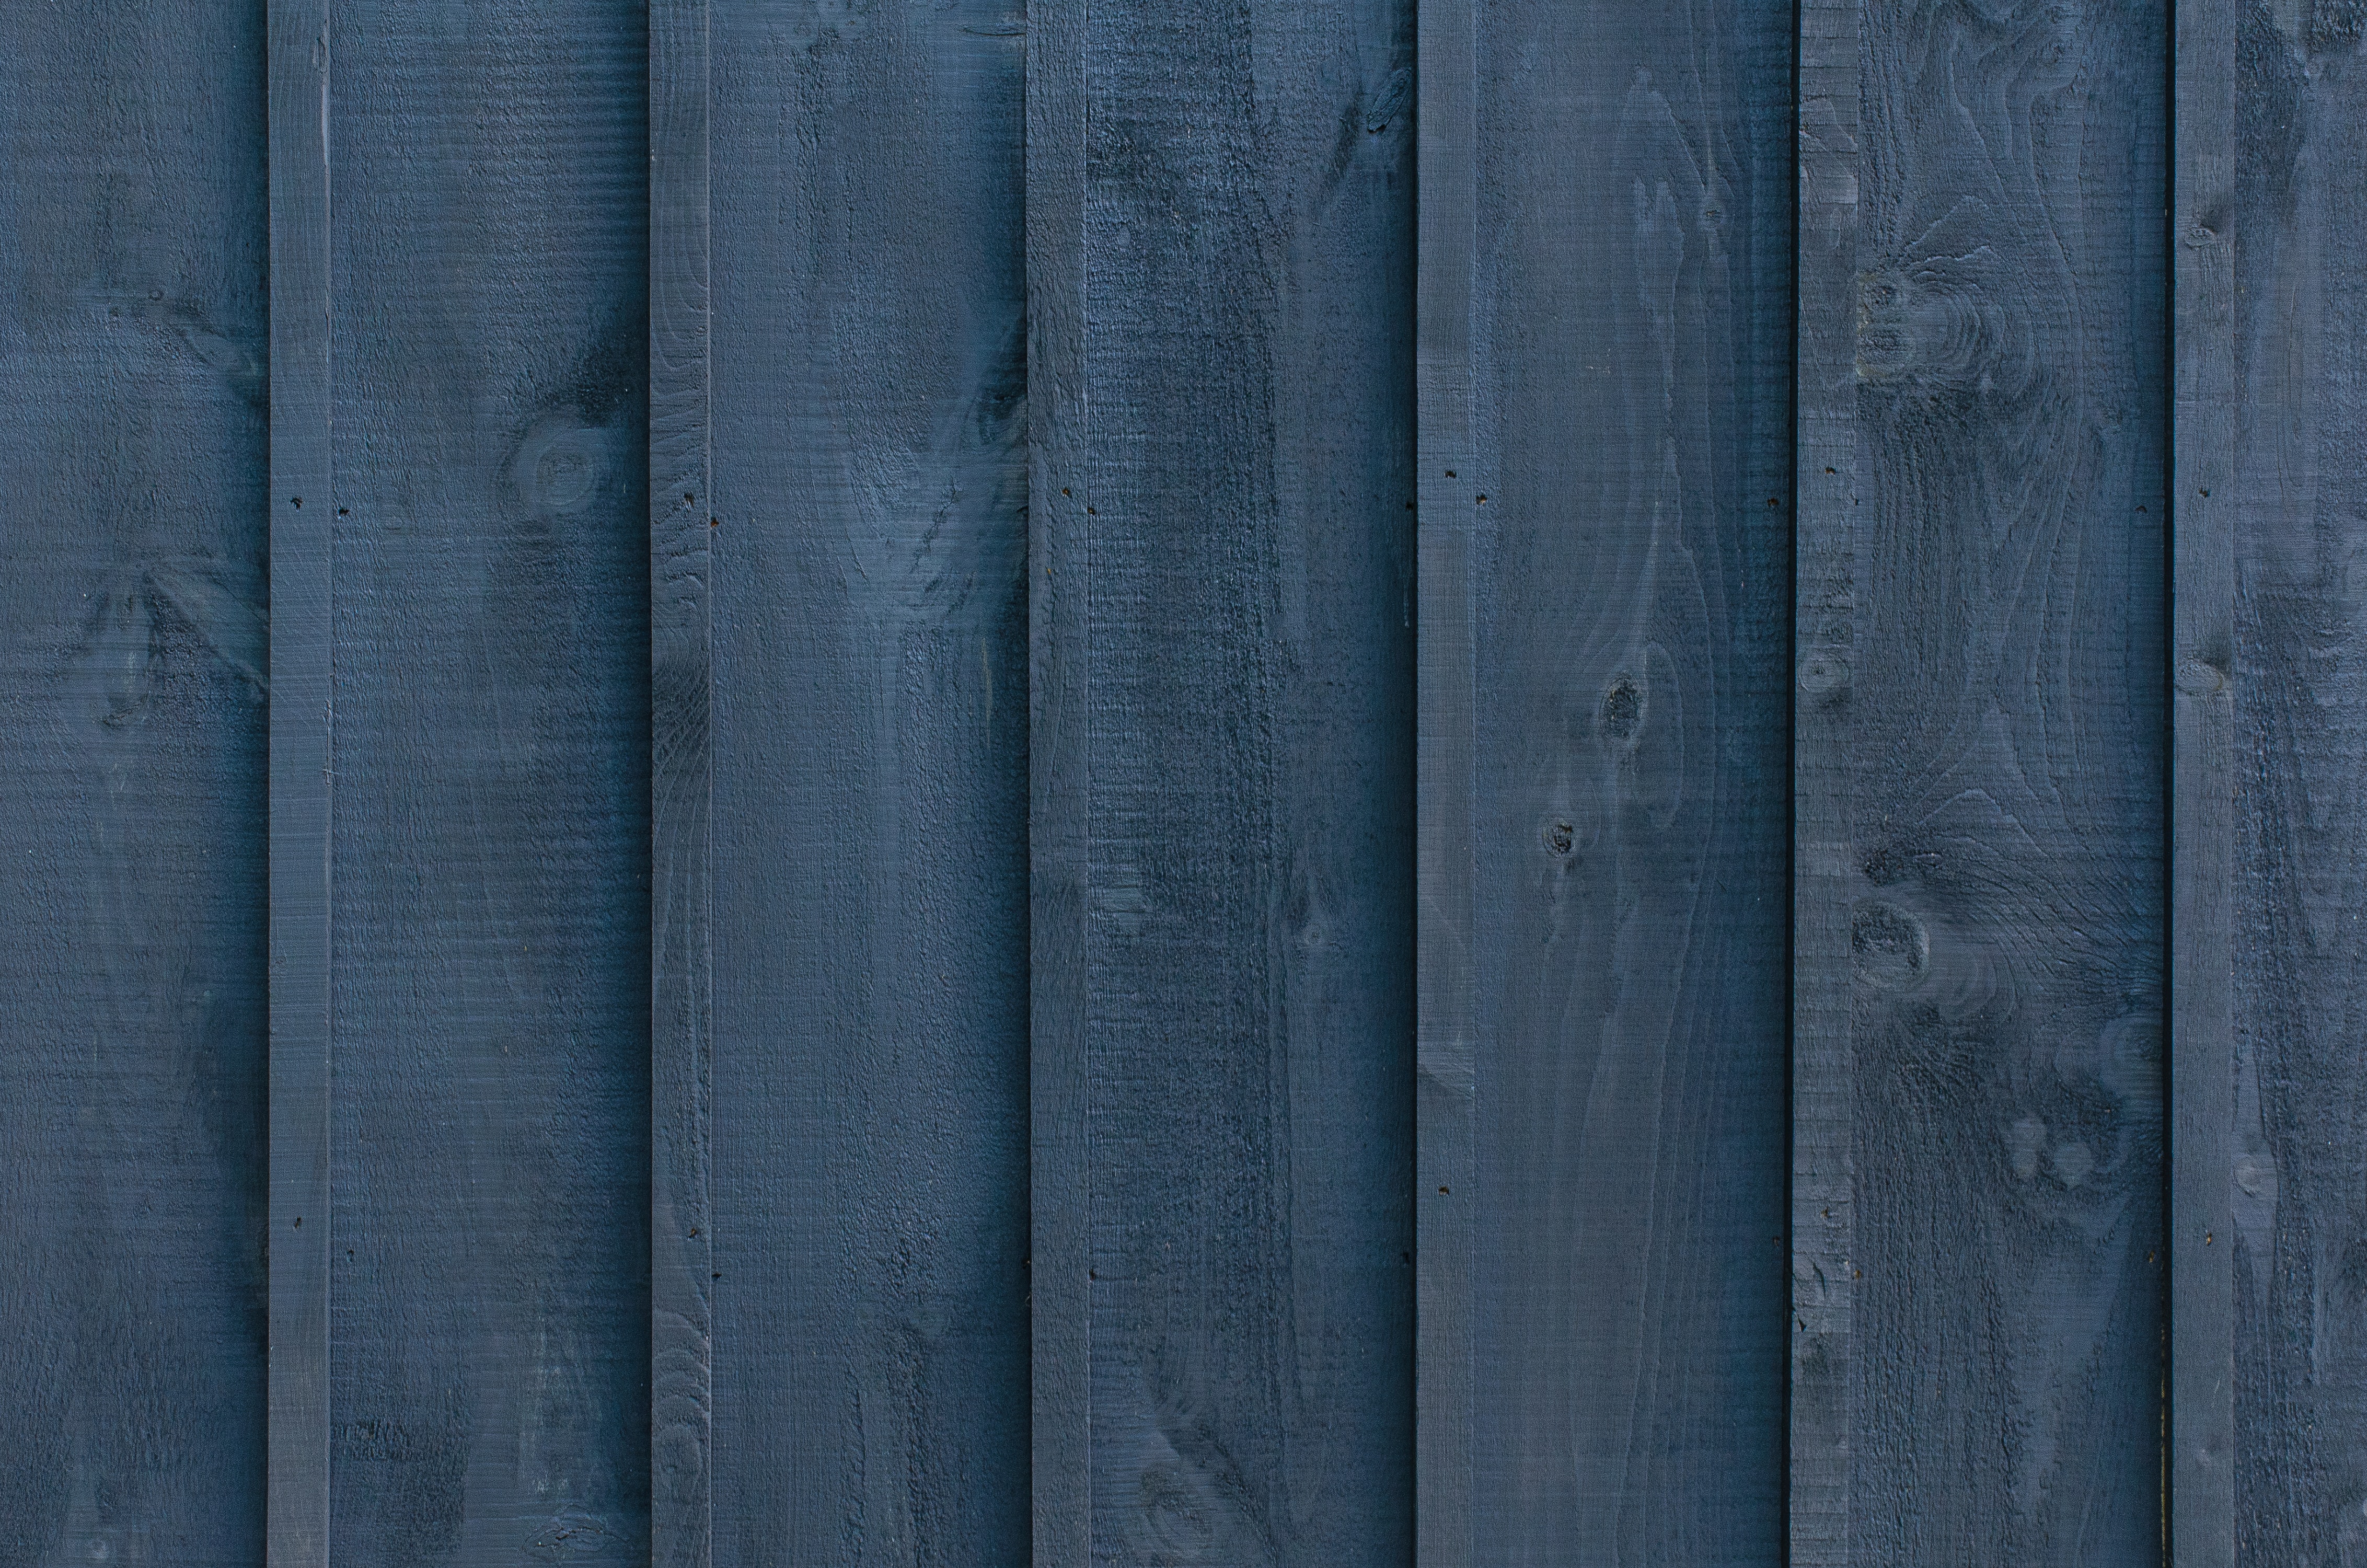 surface, wood, wooden, texture, textures, fence